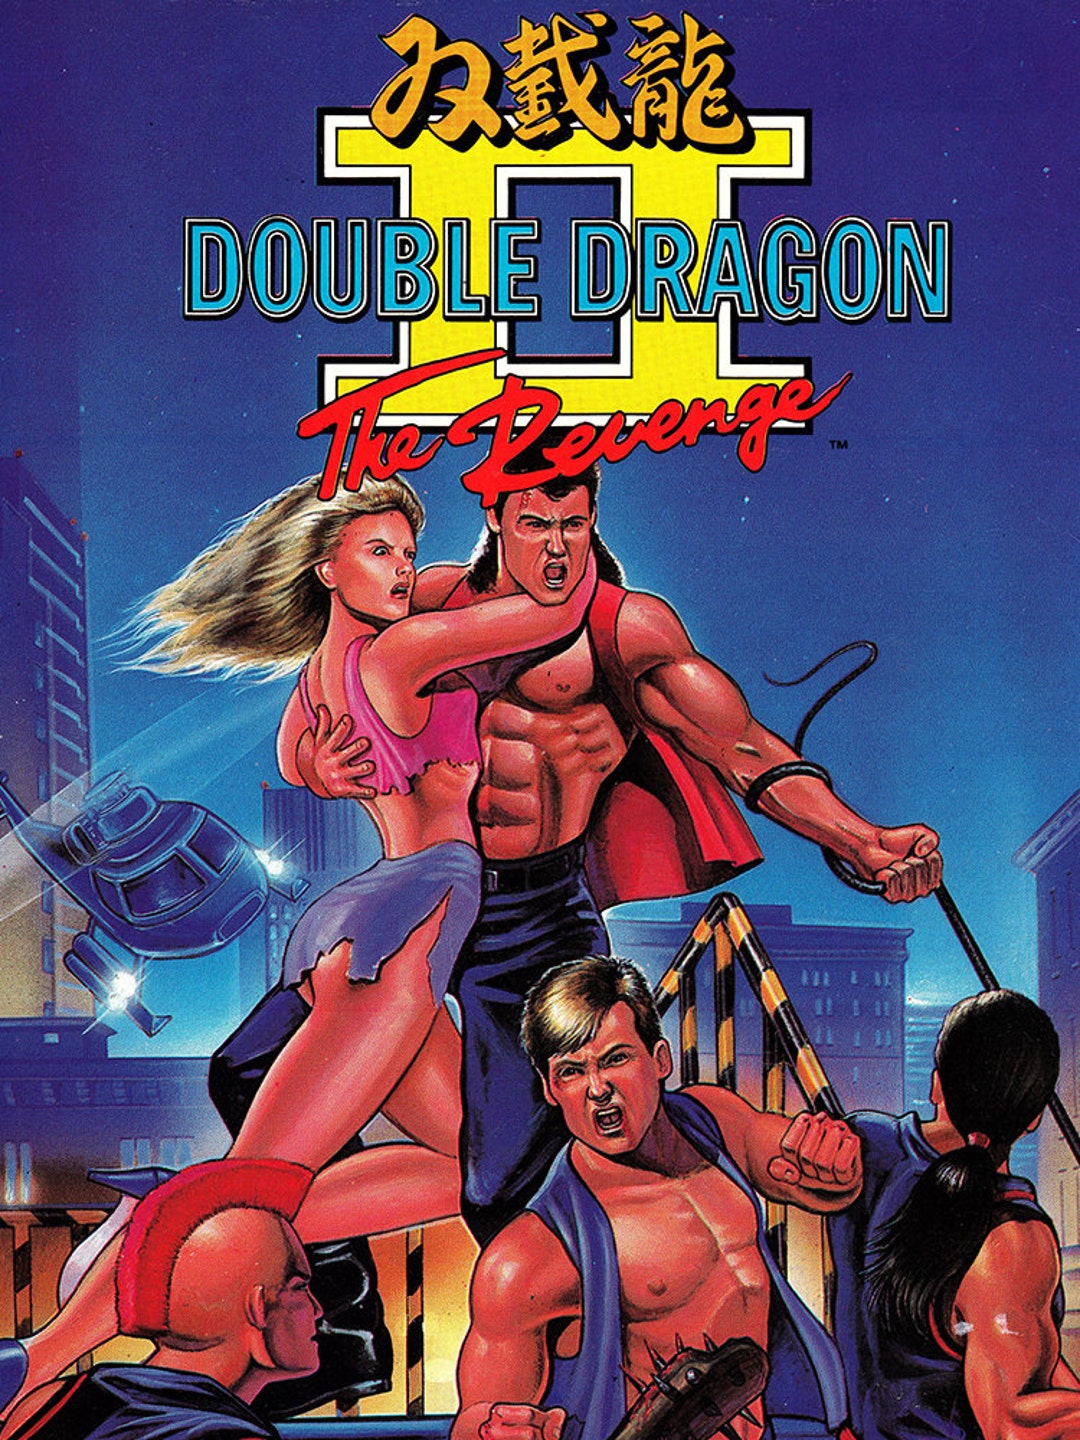 Double Dragon Old Classic Game Poster – My Hot Posters